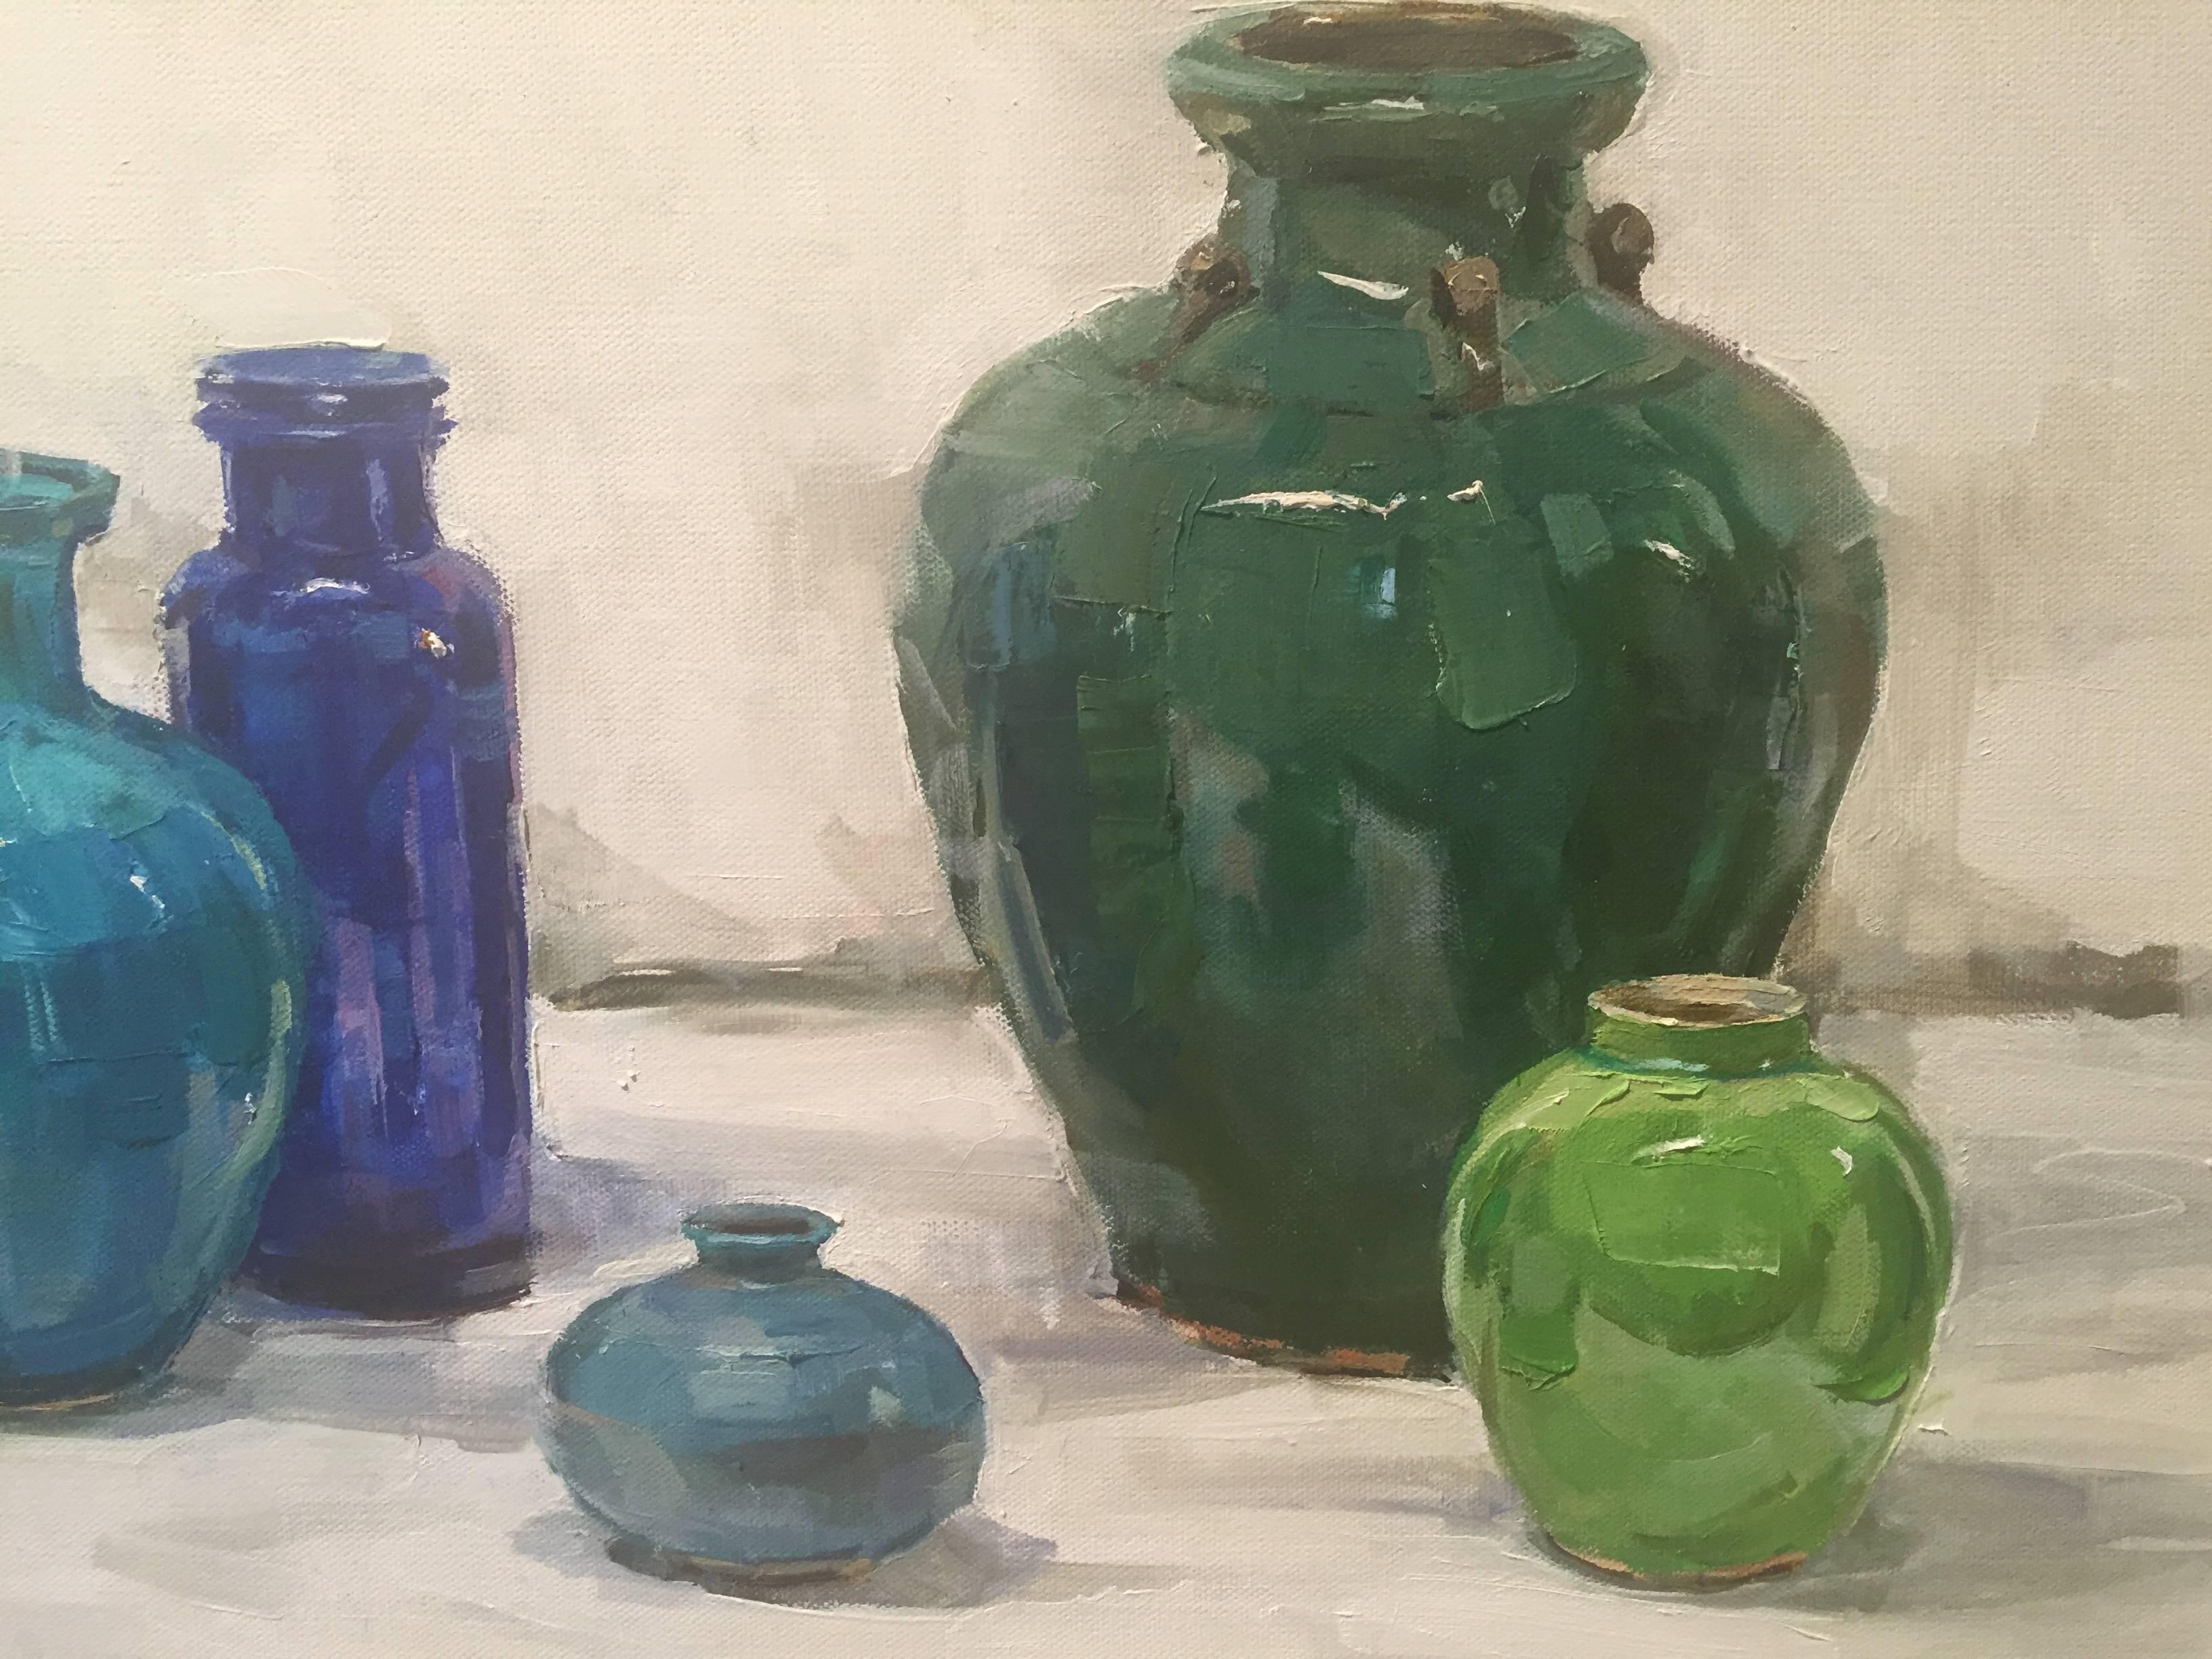 Painted from life, an array of vibrant cool jewel tone vessels placed on a pale bright backdrop.

A resident of East Hampton, New York, Beth Rundquist paints portraits, still lifes, figures and plein air landscapes. Its refreshing to see an